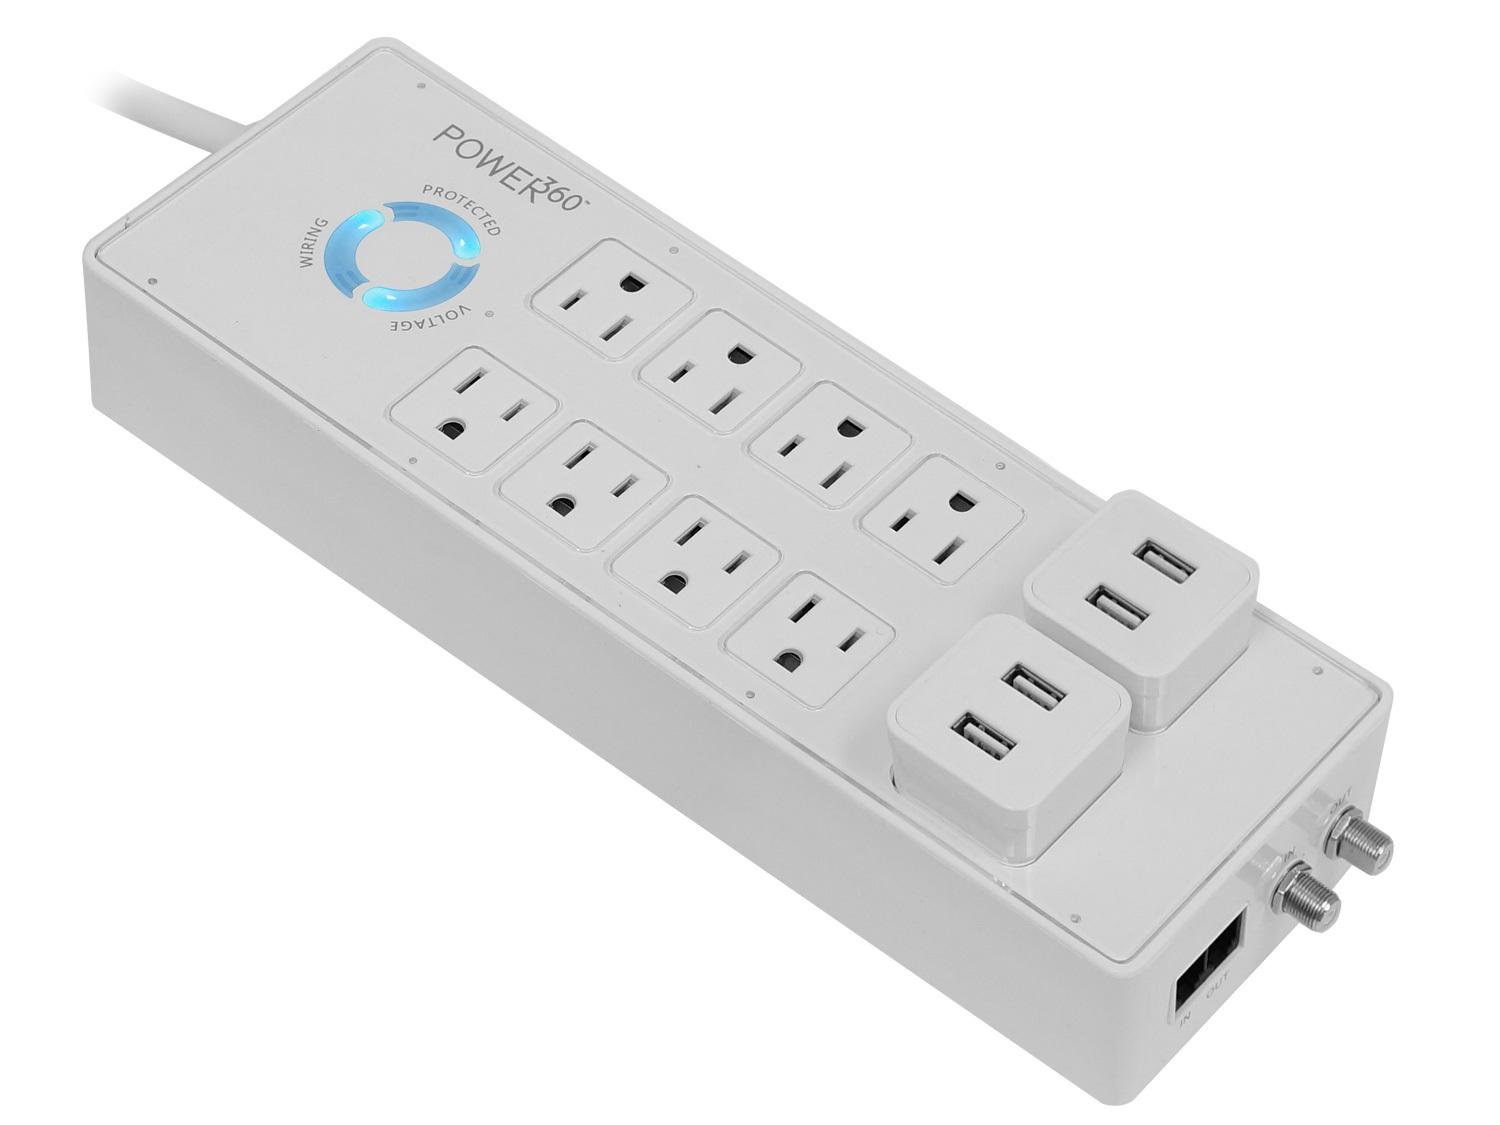 P360-8 Power360 8-Outlet Floor Strip by Panamax